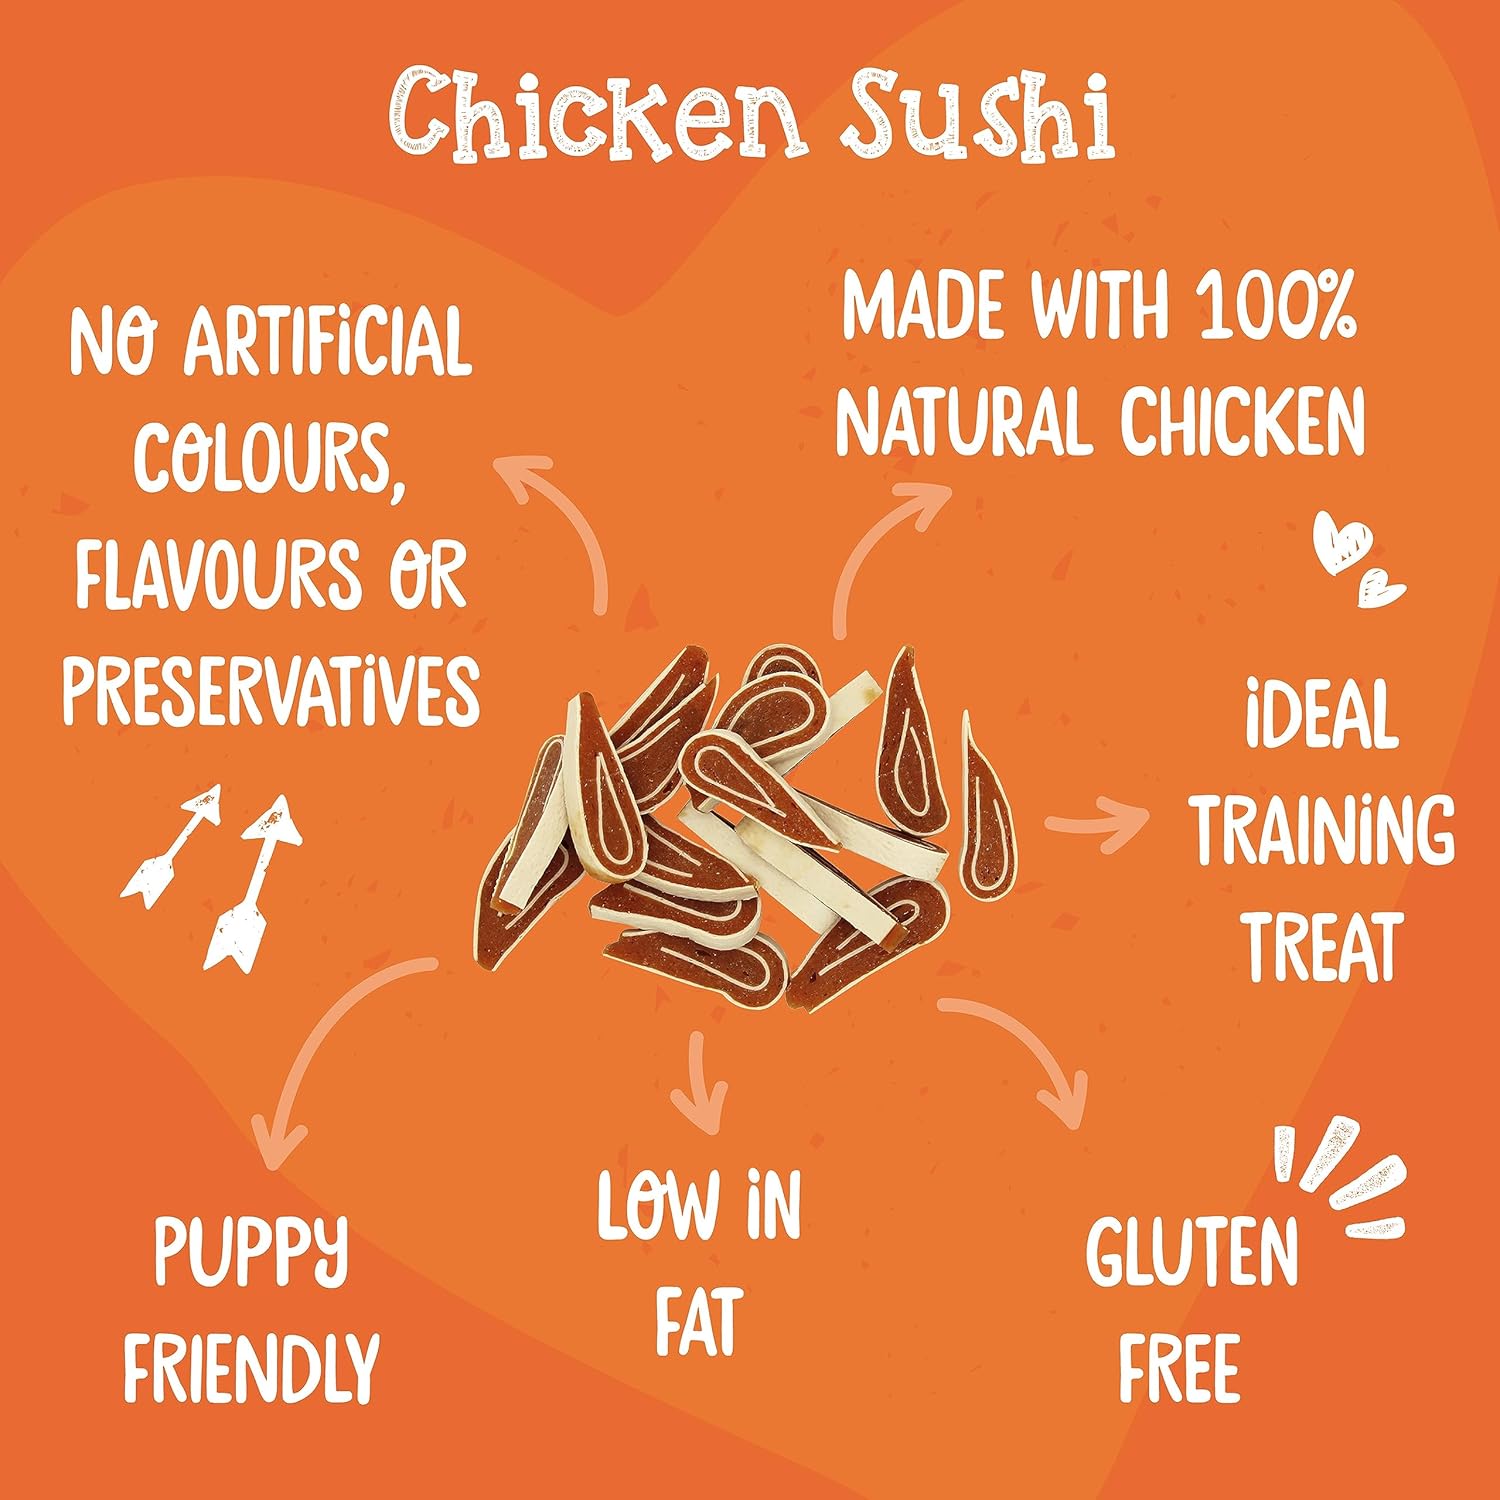 Webbox Chicken Sushi Dog Treats - Made with 100 Percent Natural Chicken, Puppy Friendly, Low Fat, Wheat and Gluten Free (11 x 80g Packs) :Pet Supplies